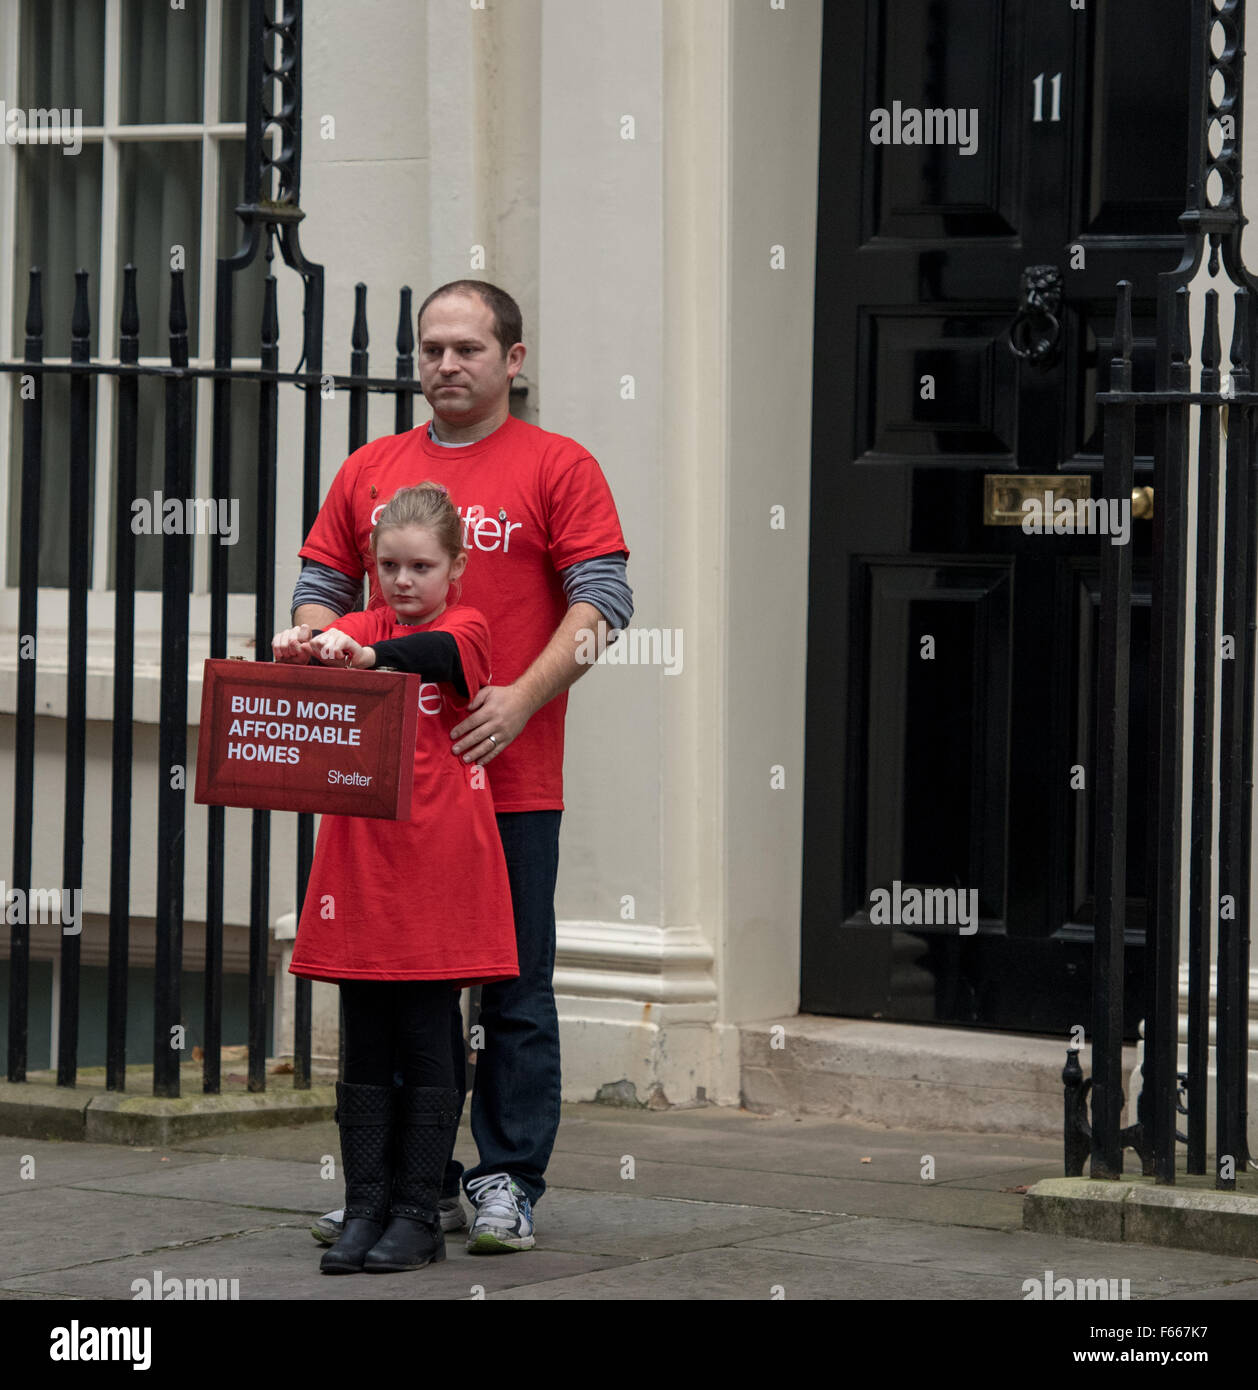 Shelter campaign for more affordable housing; outside 11 Downing Street, home of the UK Finance Minister Credit Ian Davidson/Alamy Live News Stock Photo